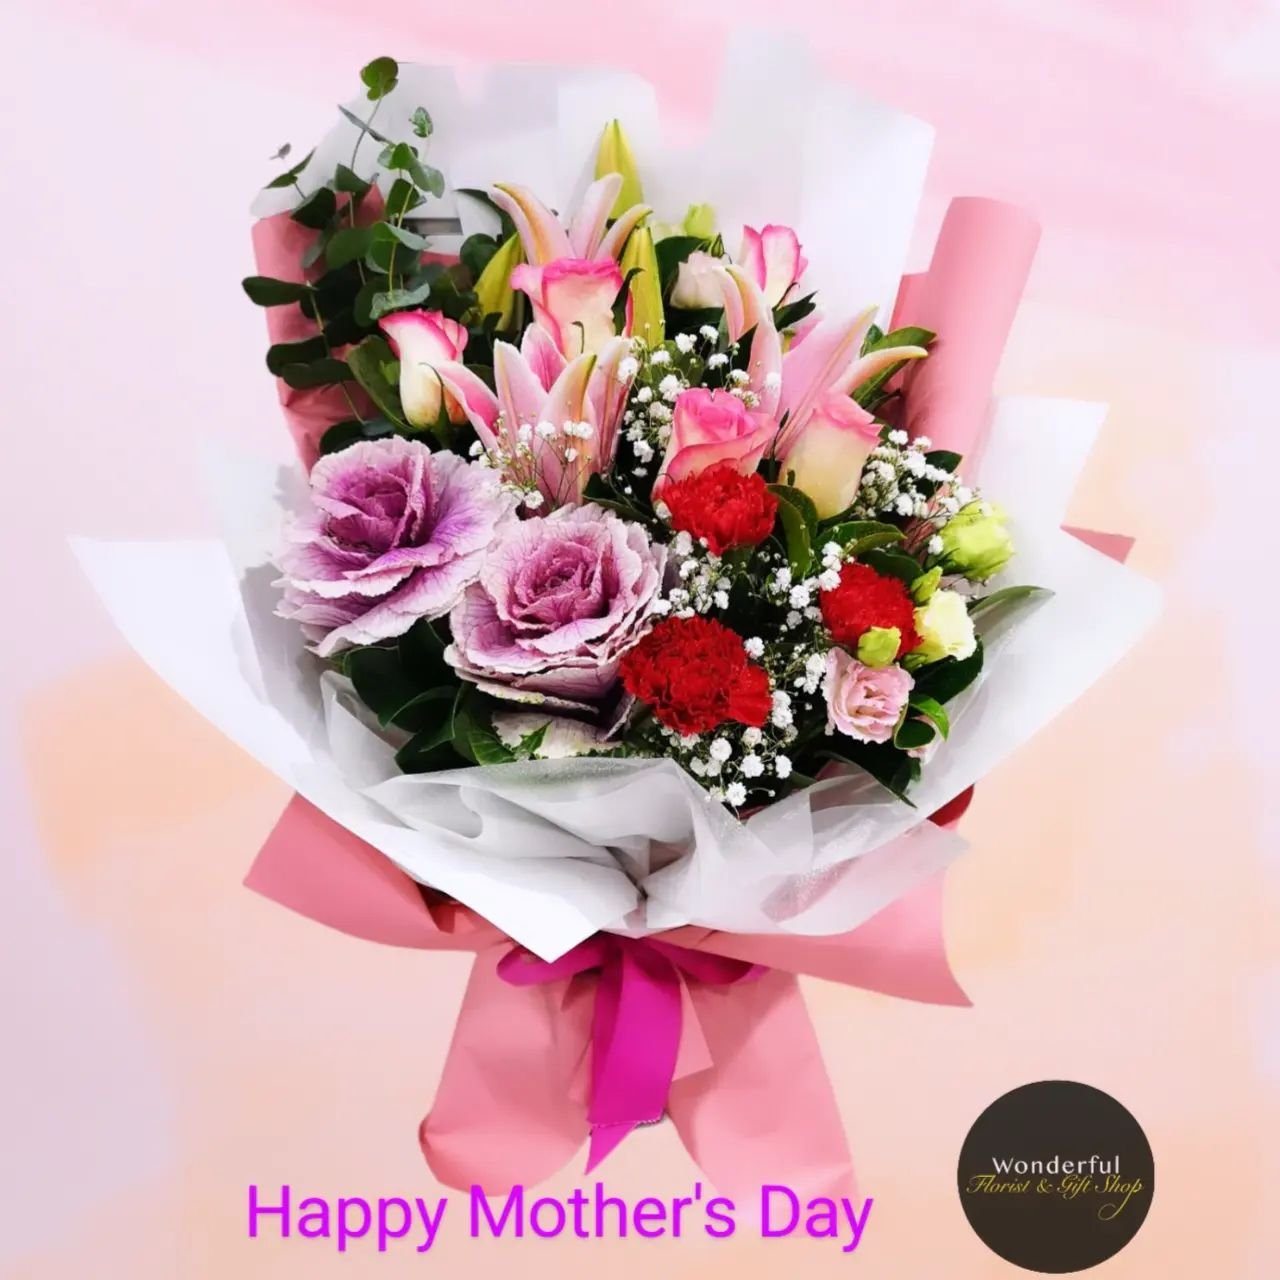 .
🌸 Don't forget to get ready for Mother's Day! 💝 Show Mom some love and appreciation. Get your gifts and plans in order to make her day extra special.

💖 Order now to receive a 10% early bird discount! This special offer ends on 10th May.
&mdash;